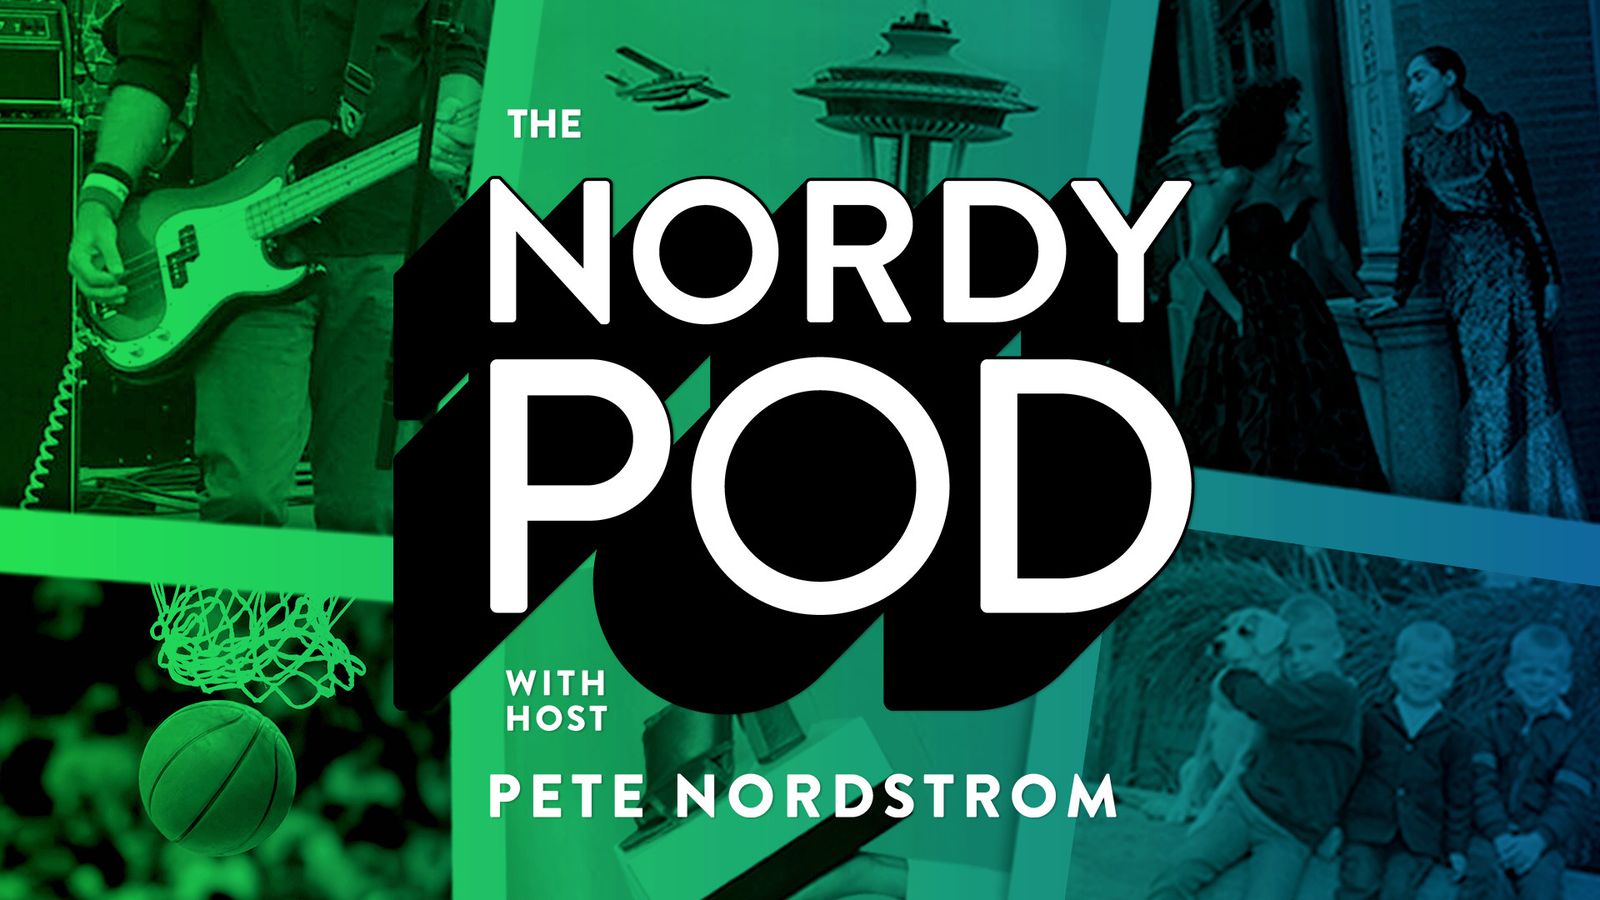 Nordstrom branches out with a podcast - Axios Seattle